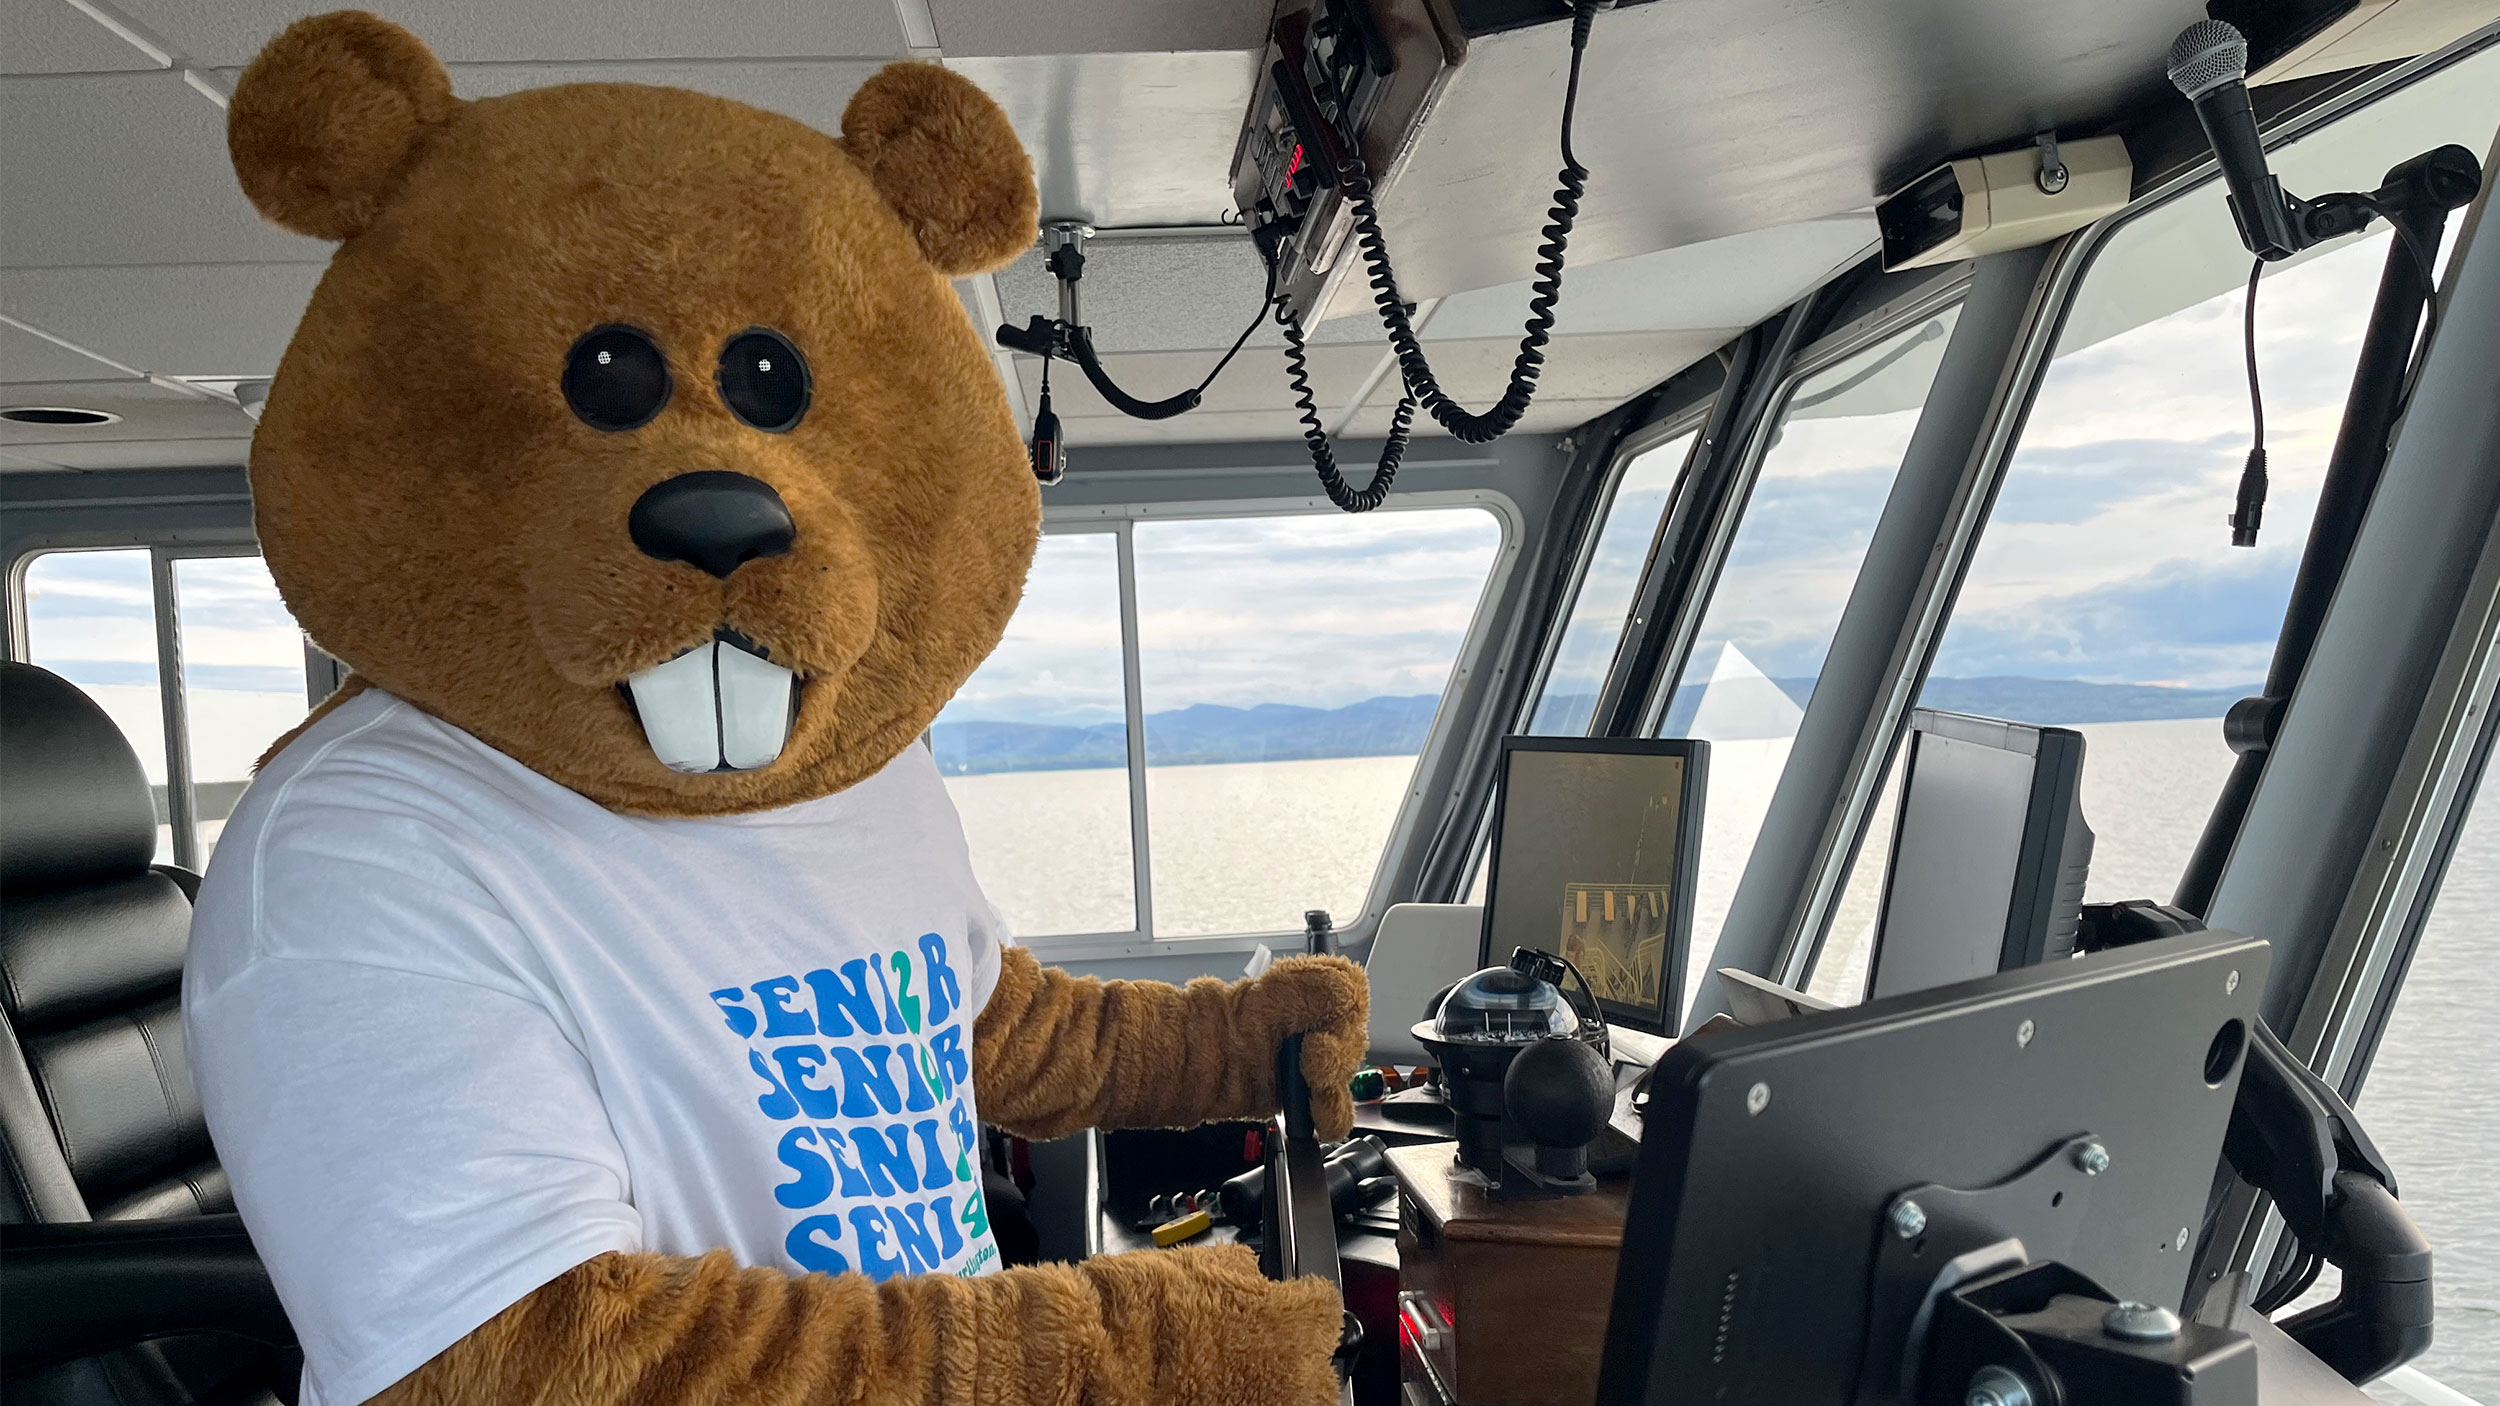 mascot chauncey t. beaver captains the ethan allen boat cruise with a lake and mountain view through the boat window